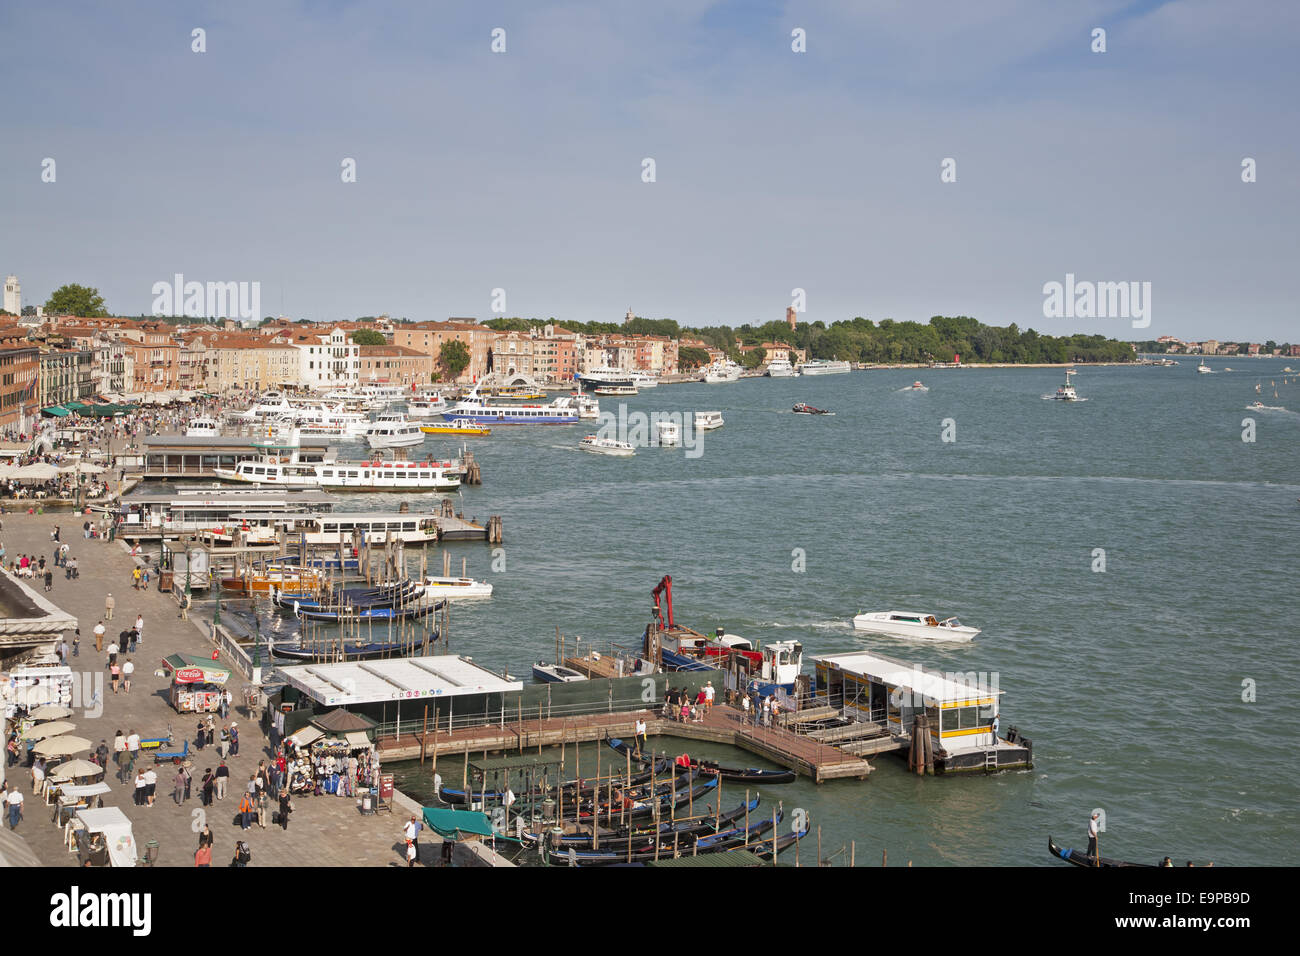 View of waterfront with gondolas and tour boats, looking from roof of Hotel Danielli, Riva Degli Schiavoni, Castello District, Venice, Veneto, Italy, May Stock Photo